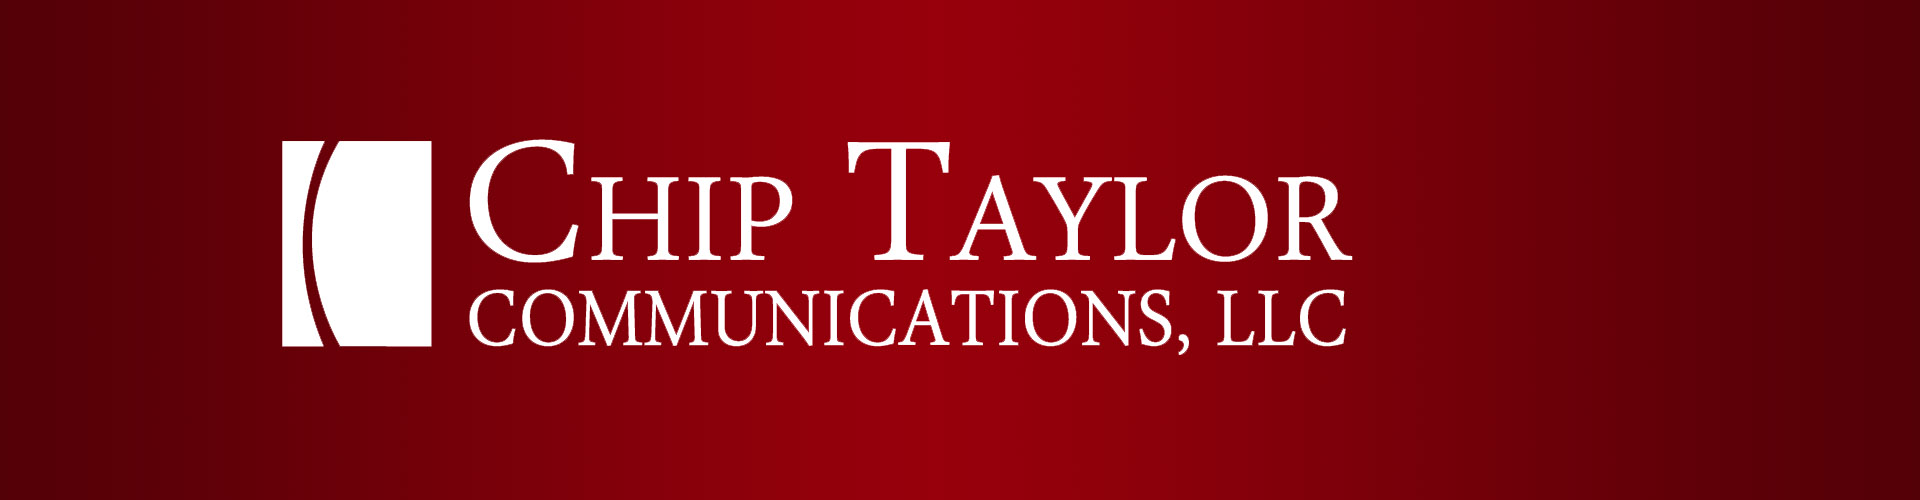 Image for Chip Taylor Communications